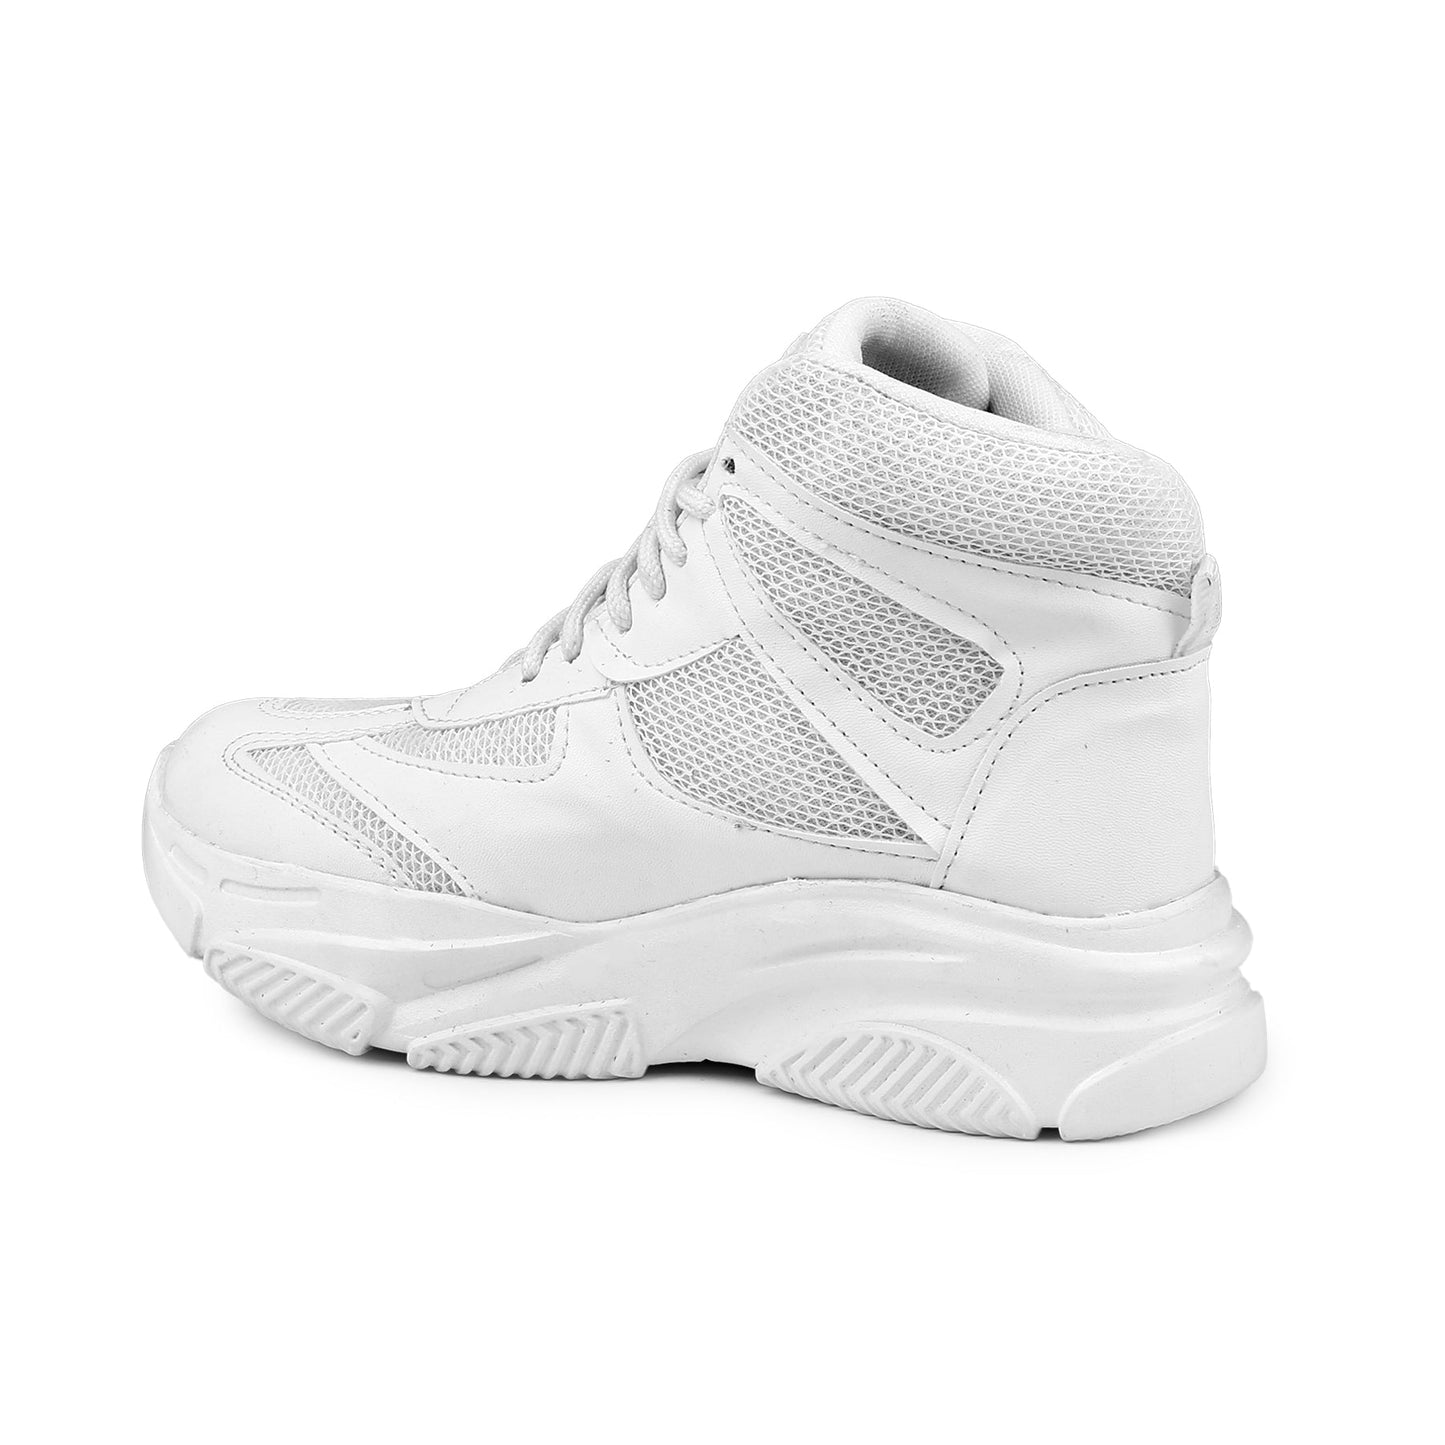 Women's Stylish and Comfortable Sports Shoes